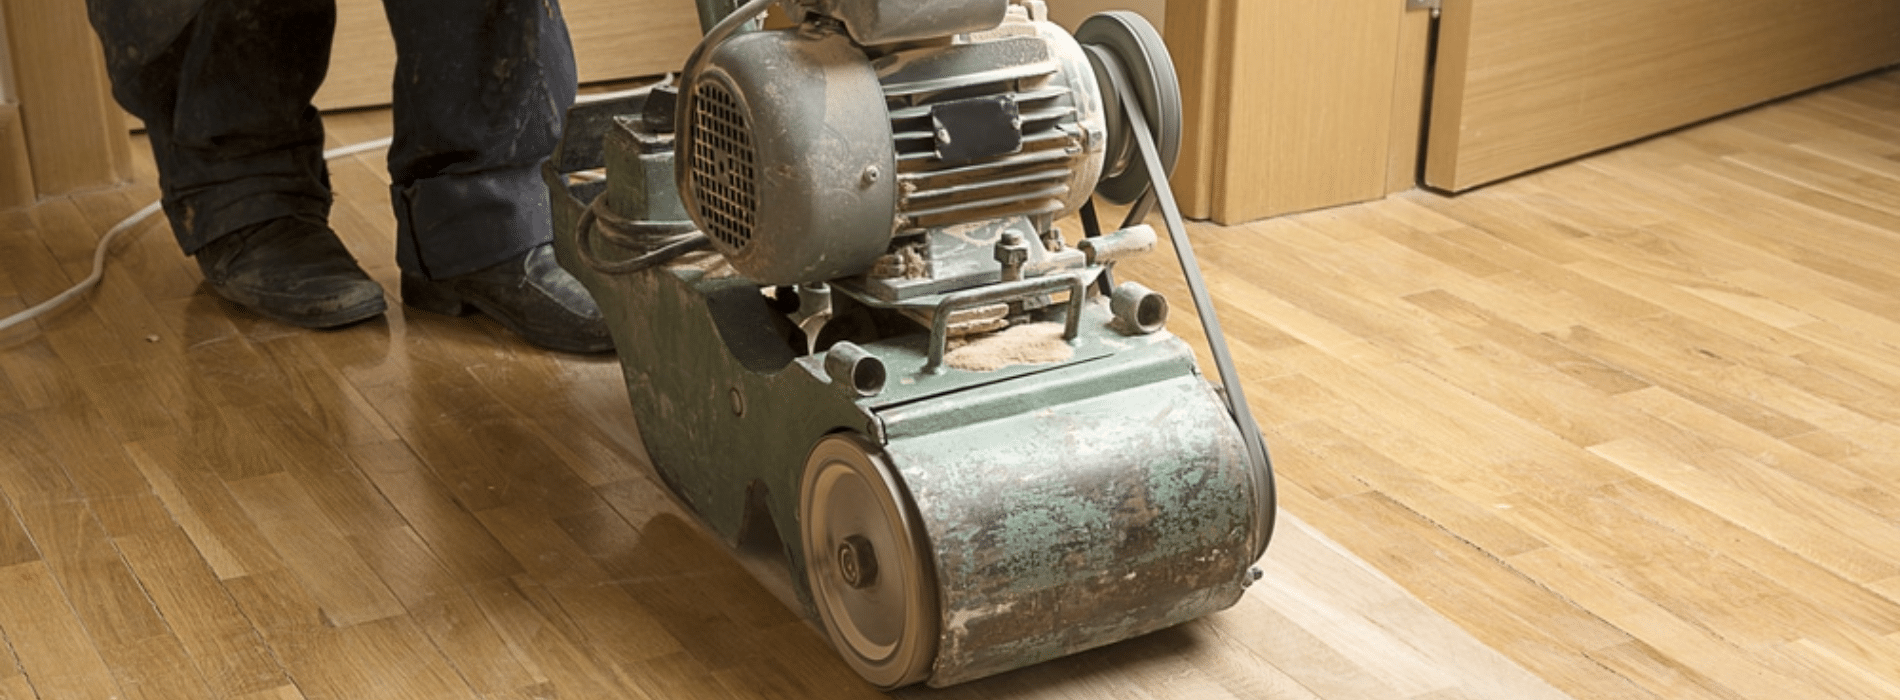 Mr Sander® use a Bona Scorpion drum sander (200 mm, 1.5 kW) connected to a dust extraction system with a HEPA filter (240V, 50Hz) for sanding parquet floors in Tufnell Park, N19. This setup ensures clean and efficient results. 